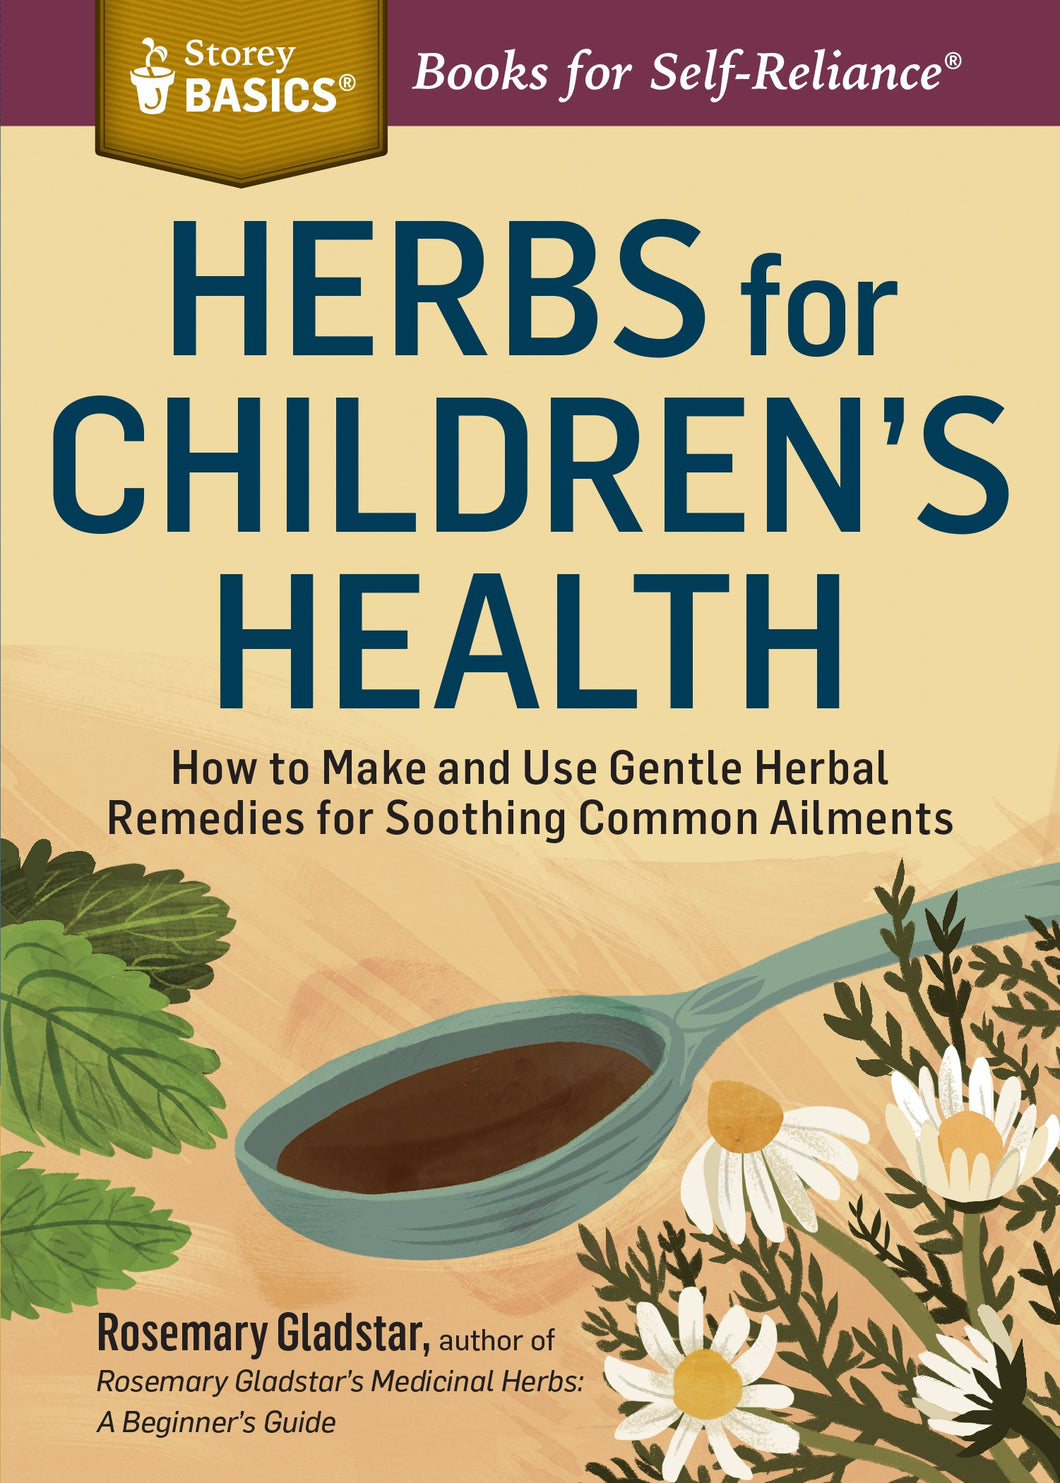 Herbs for Children’s Health by Rosemary Gladstar